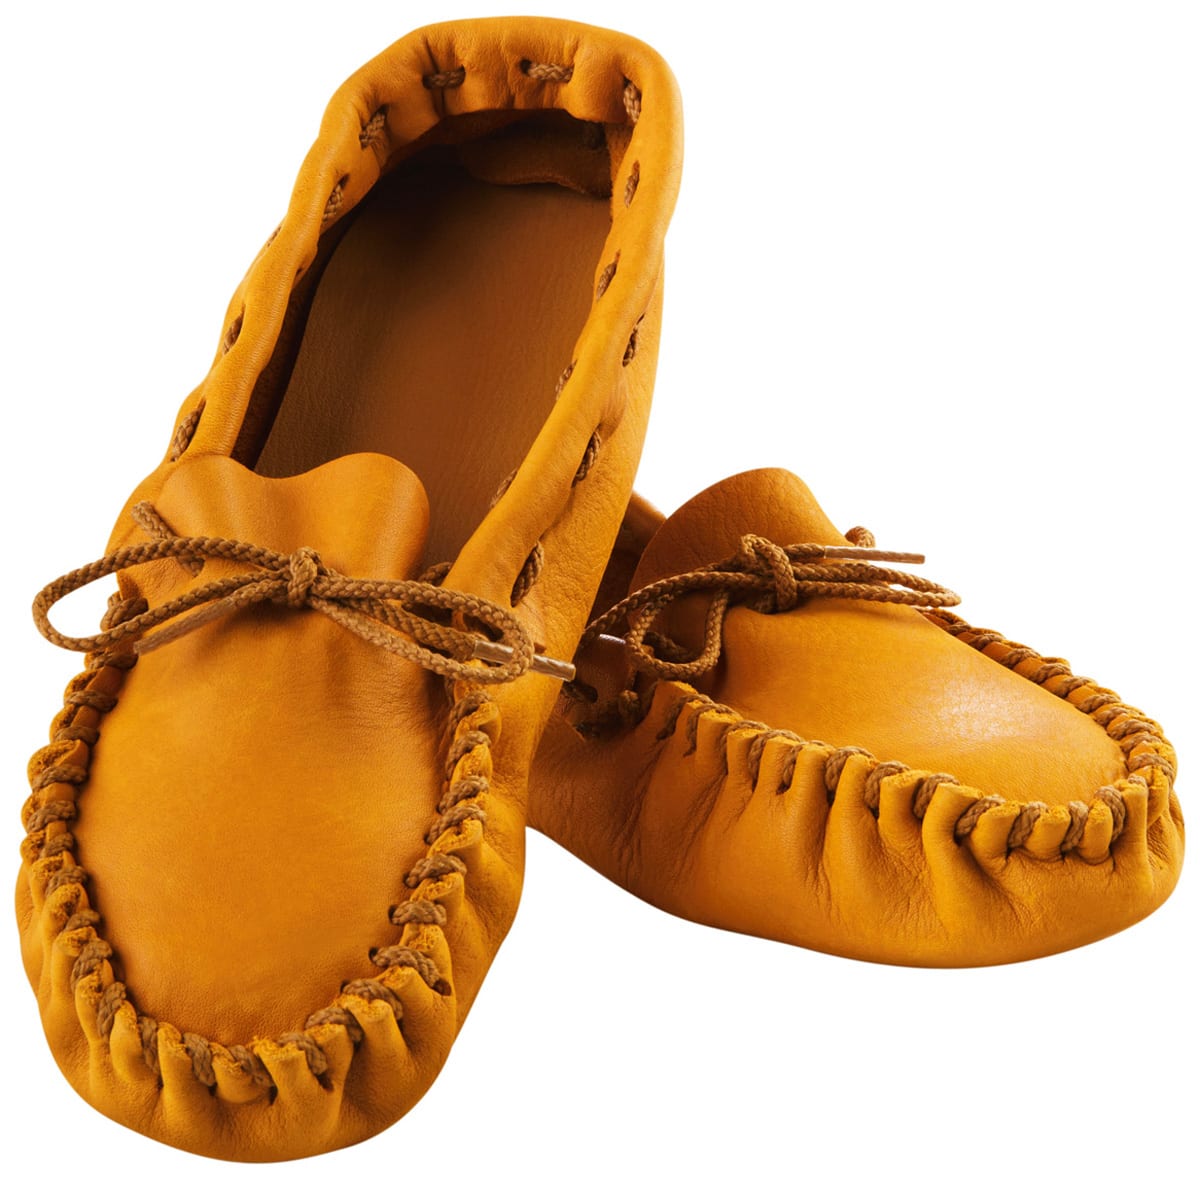 Moccasin Kit by ArtMinds&#xAE;